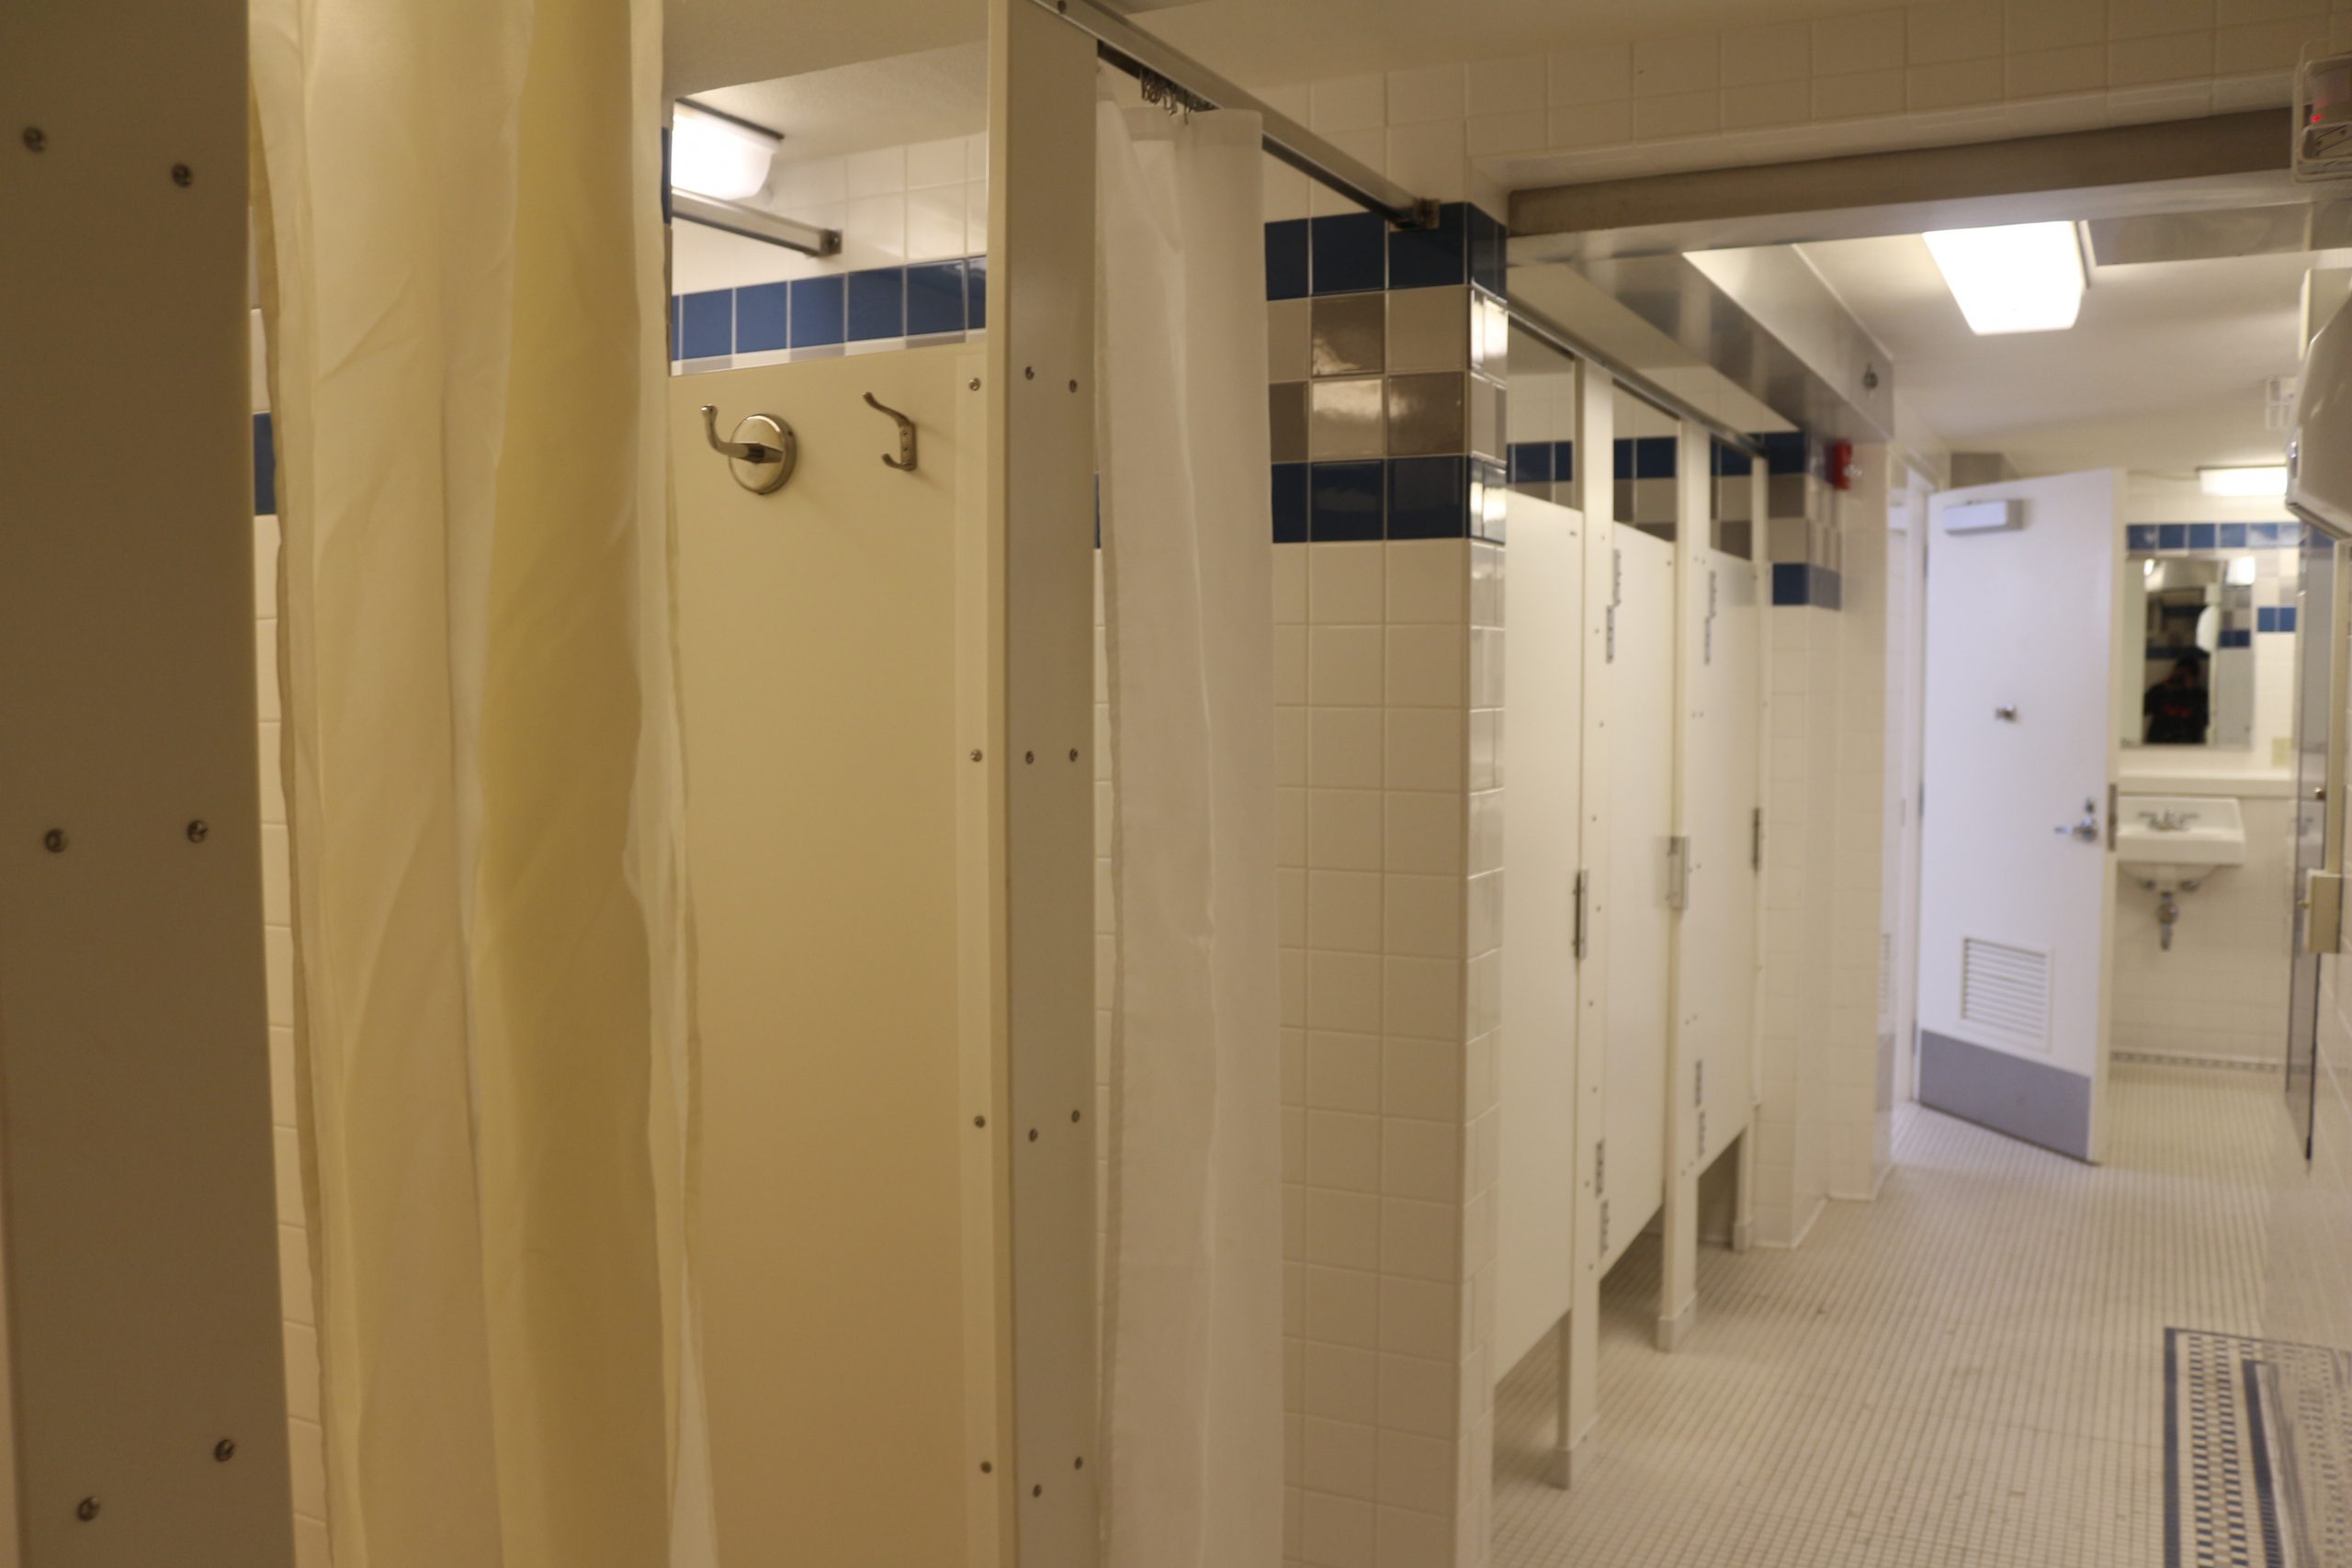 Shared floor bathroom showing shower stall and toilet stalls